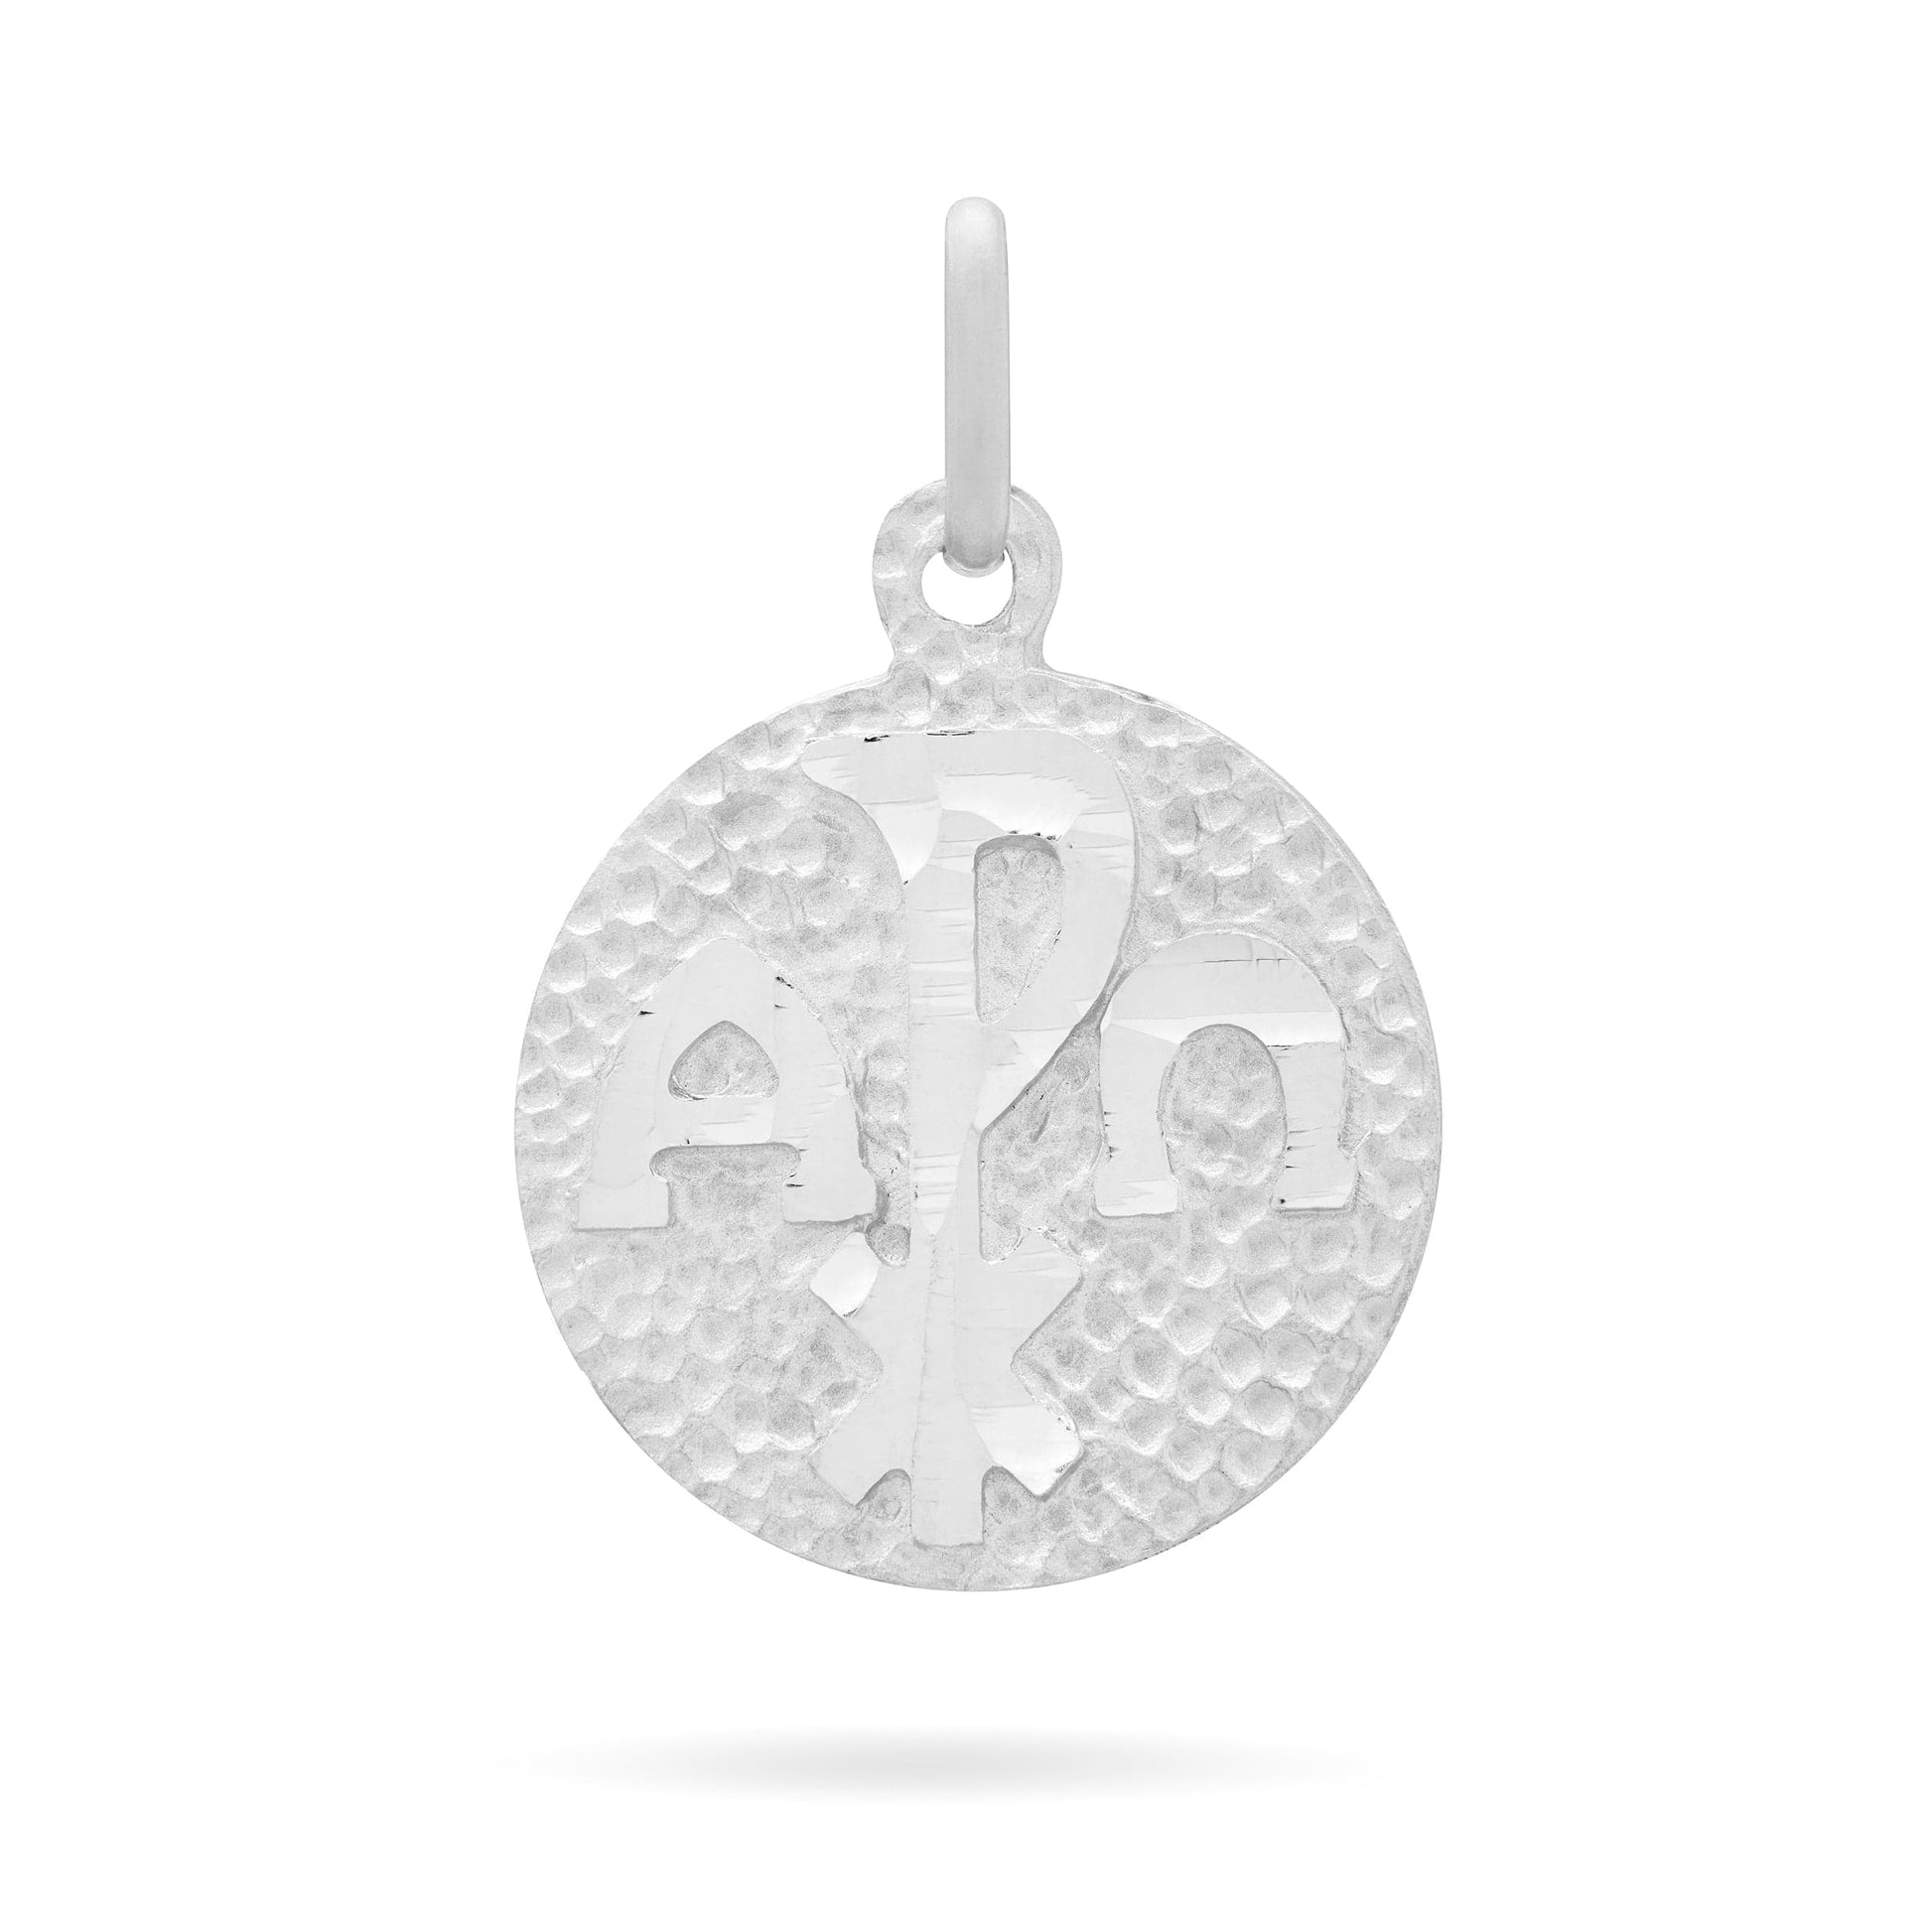 MONDO CATTOLICO 15 mm (0.59 in) White Gold Peace Cross medal